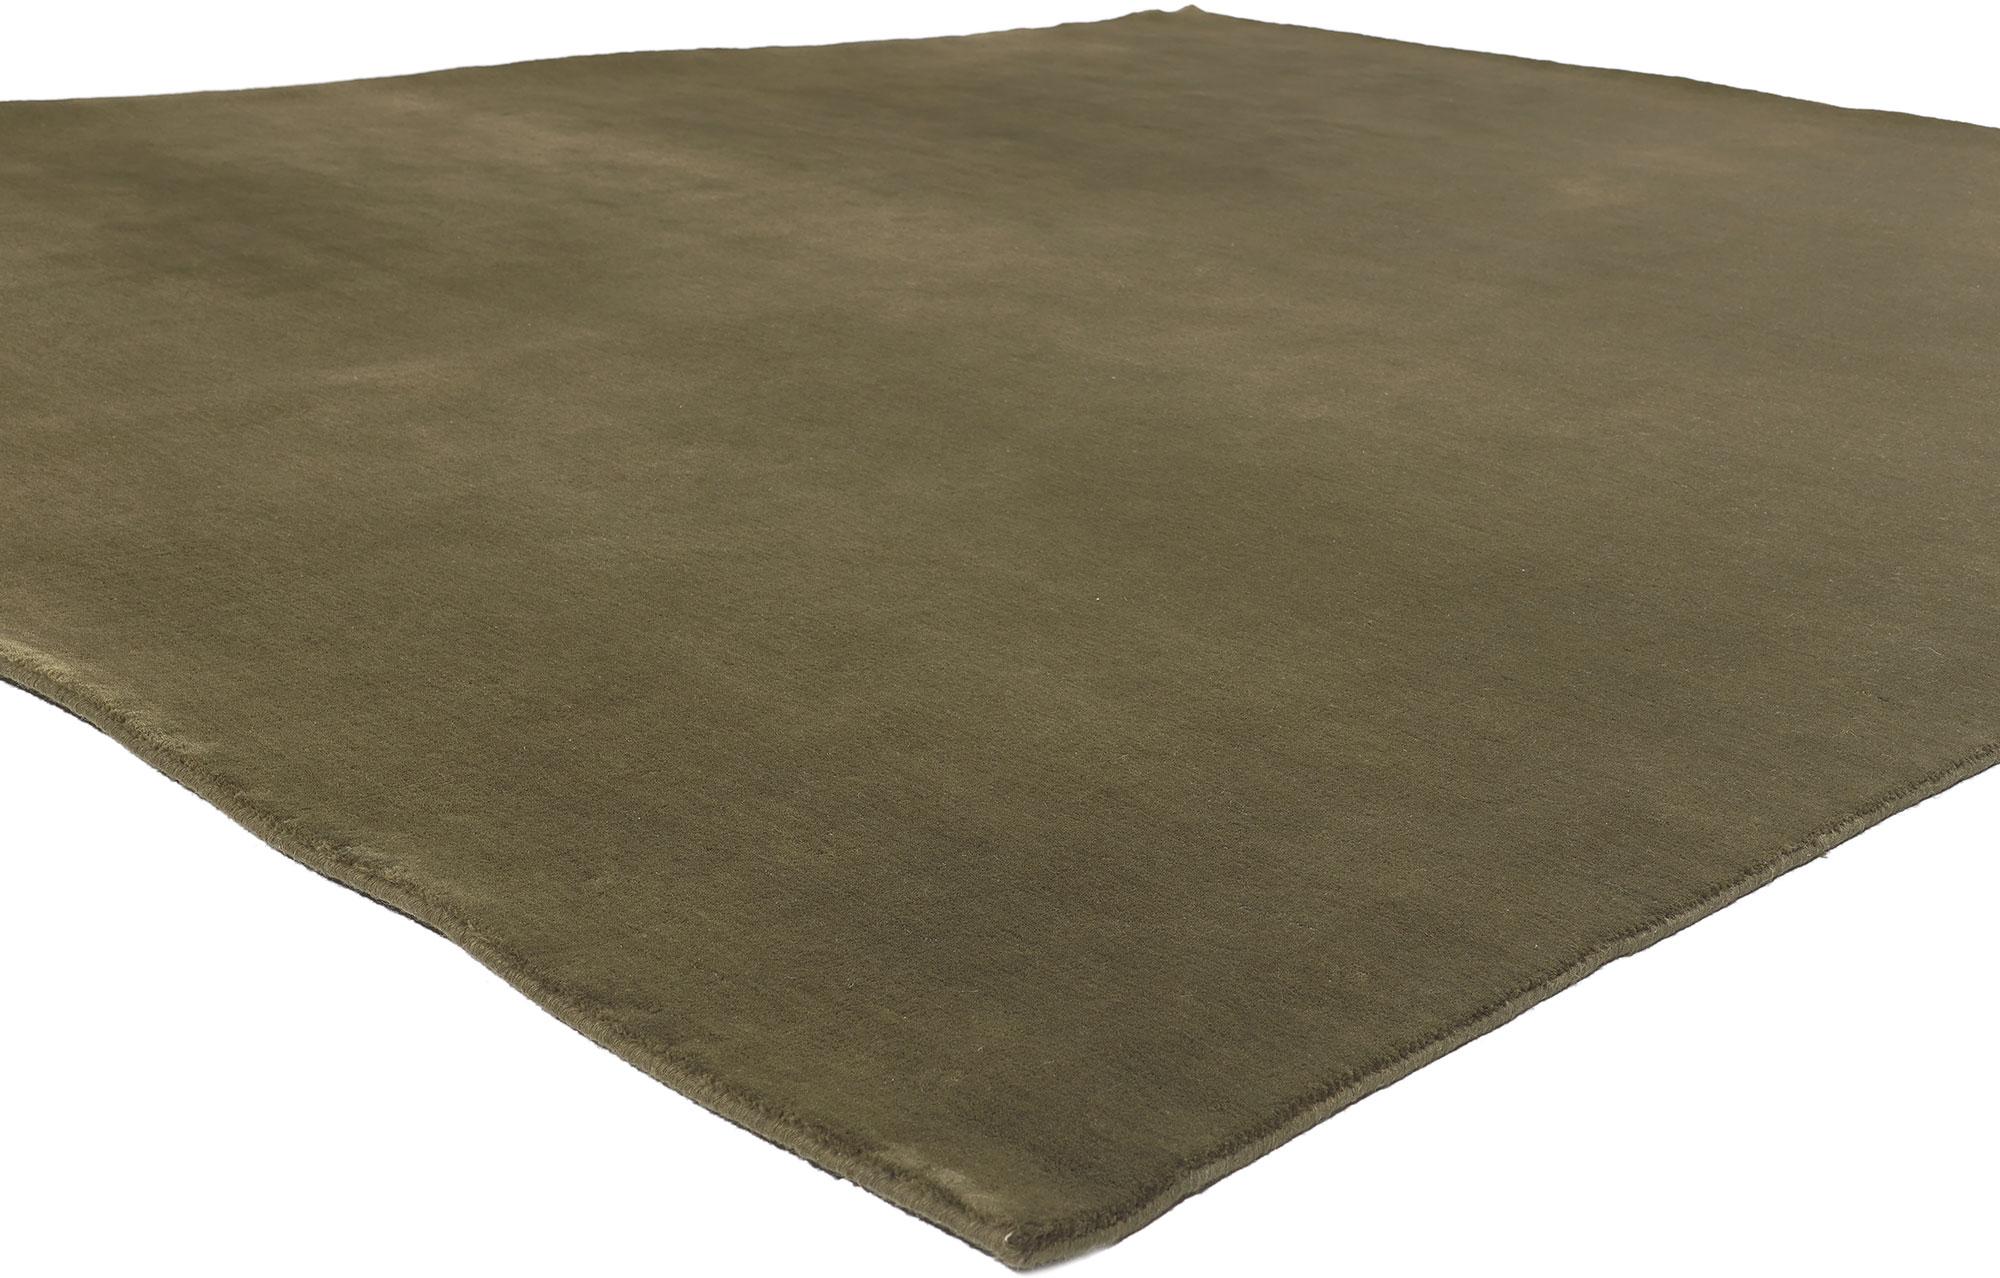 30999 New Moss-Olive Green Modern Rug, 08'00 x 09'09.
Biophilic Design meets earth-tone elegance in this handcrafted modern olive green area rug. The lavish texture and earthy green colorway woven into this piece work together creating a truly